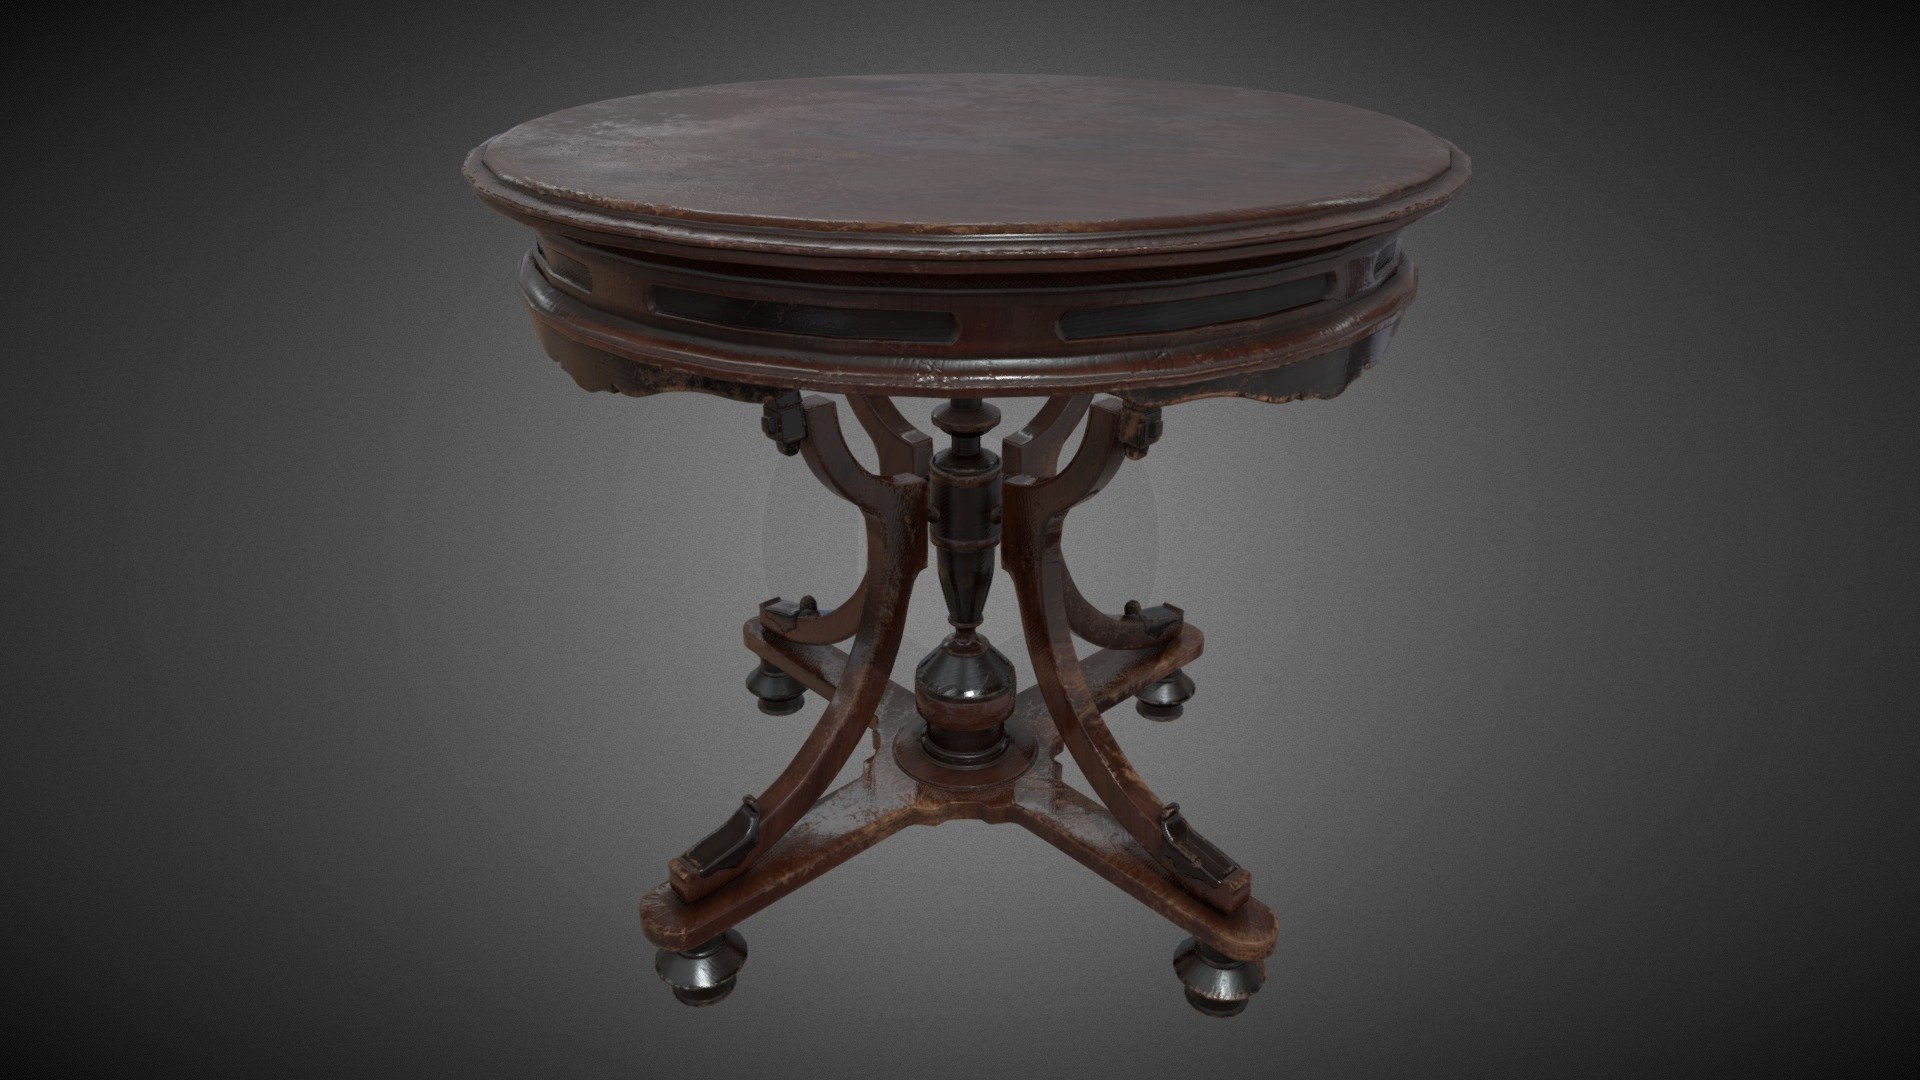 This is an old vintage round table asset made for old environments and houses with wooden decoration and furniture, you can buy it in the link below: - Vintage round table - 3D model by IPfuentes 3d model